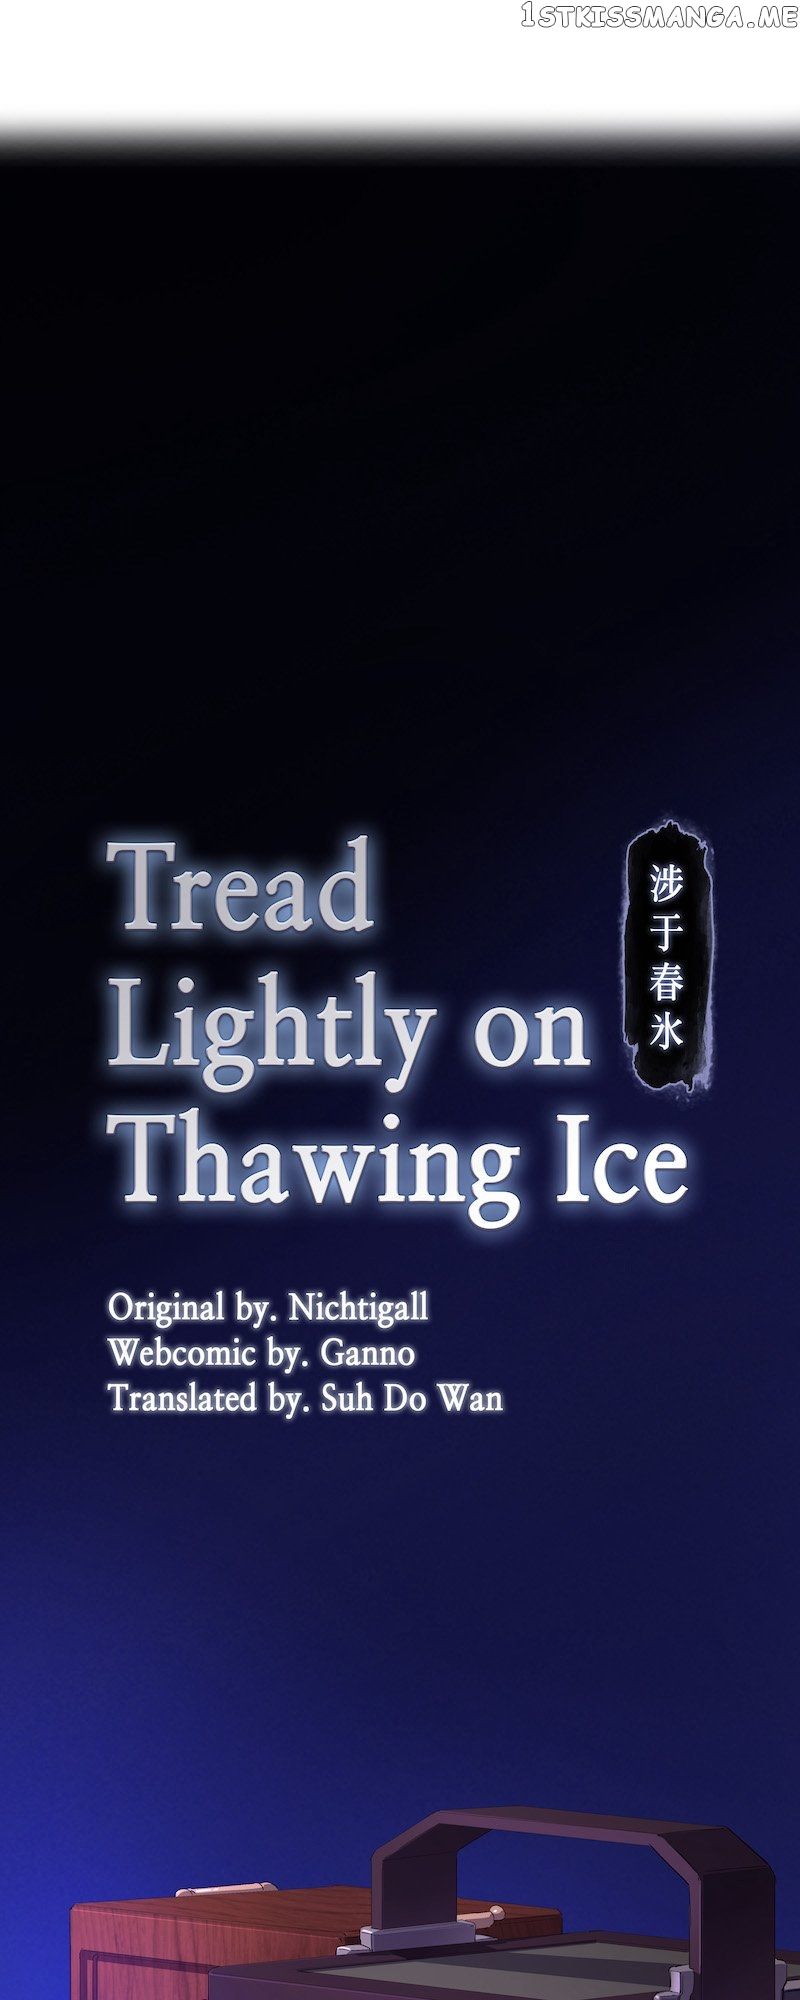 Tread Lightly On Thawing Ice - Page 1